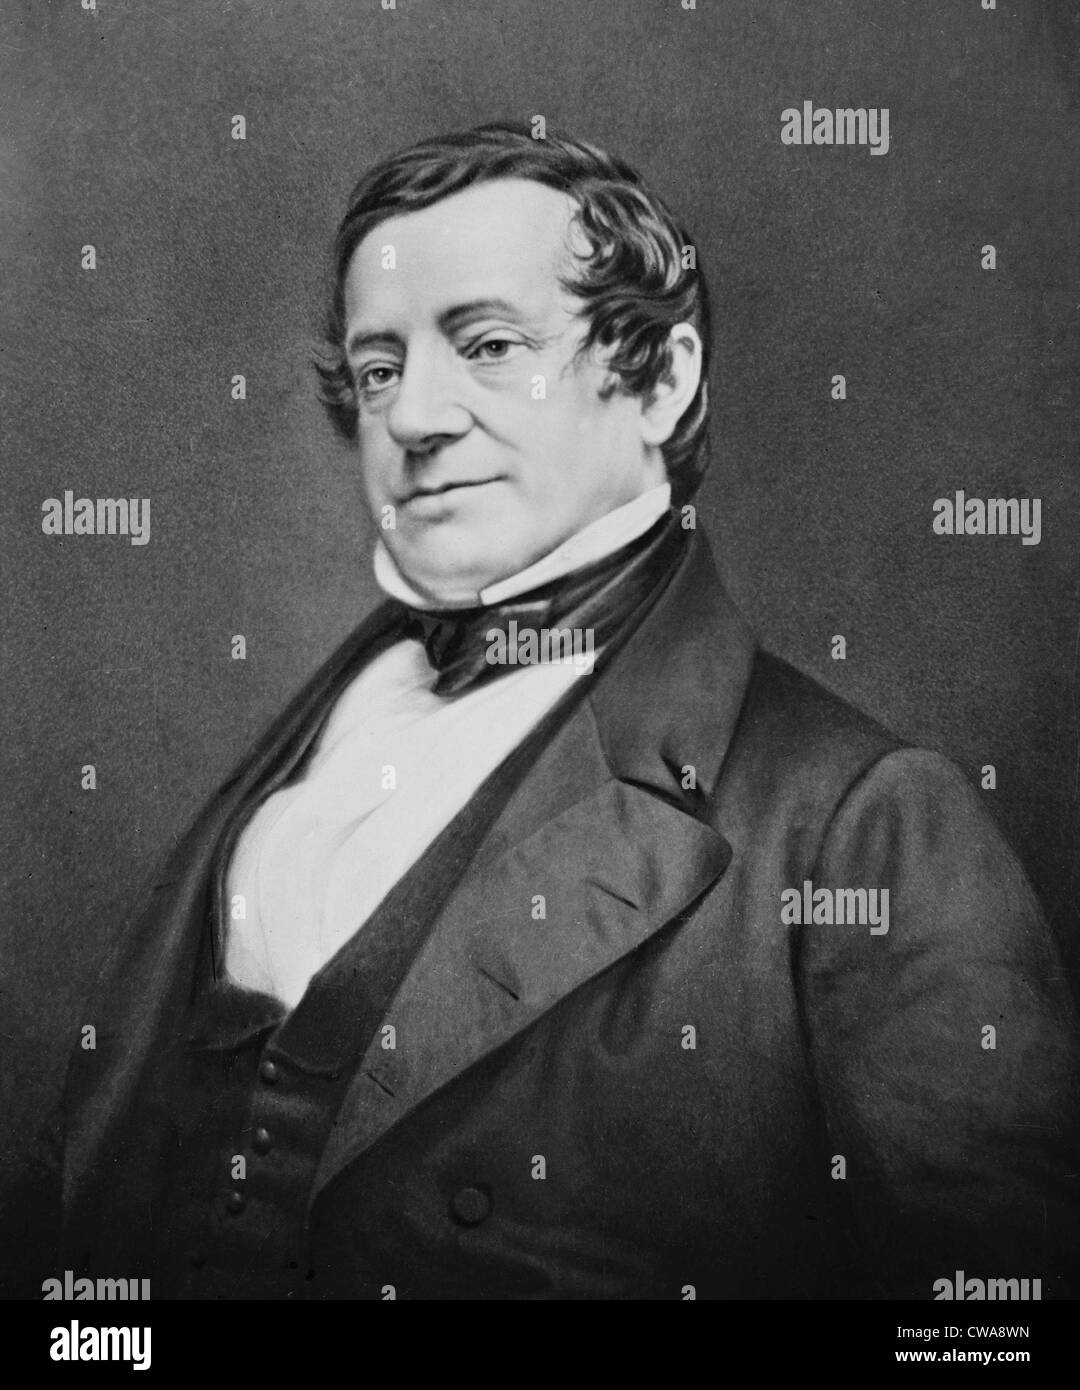 Washington Irving (1783-1859), American author of classic short stories “The Legend of Sleepy Hollow” and “Rip Van Winkle,” in Stock Photo